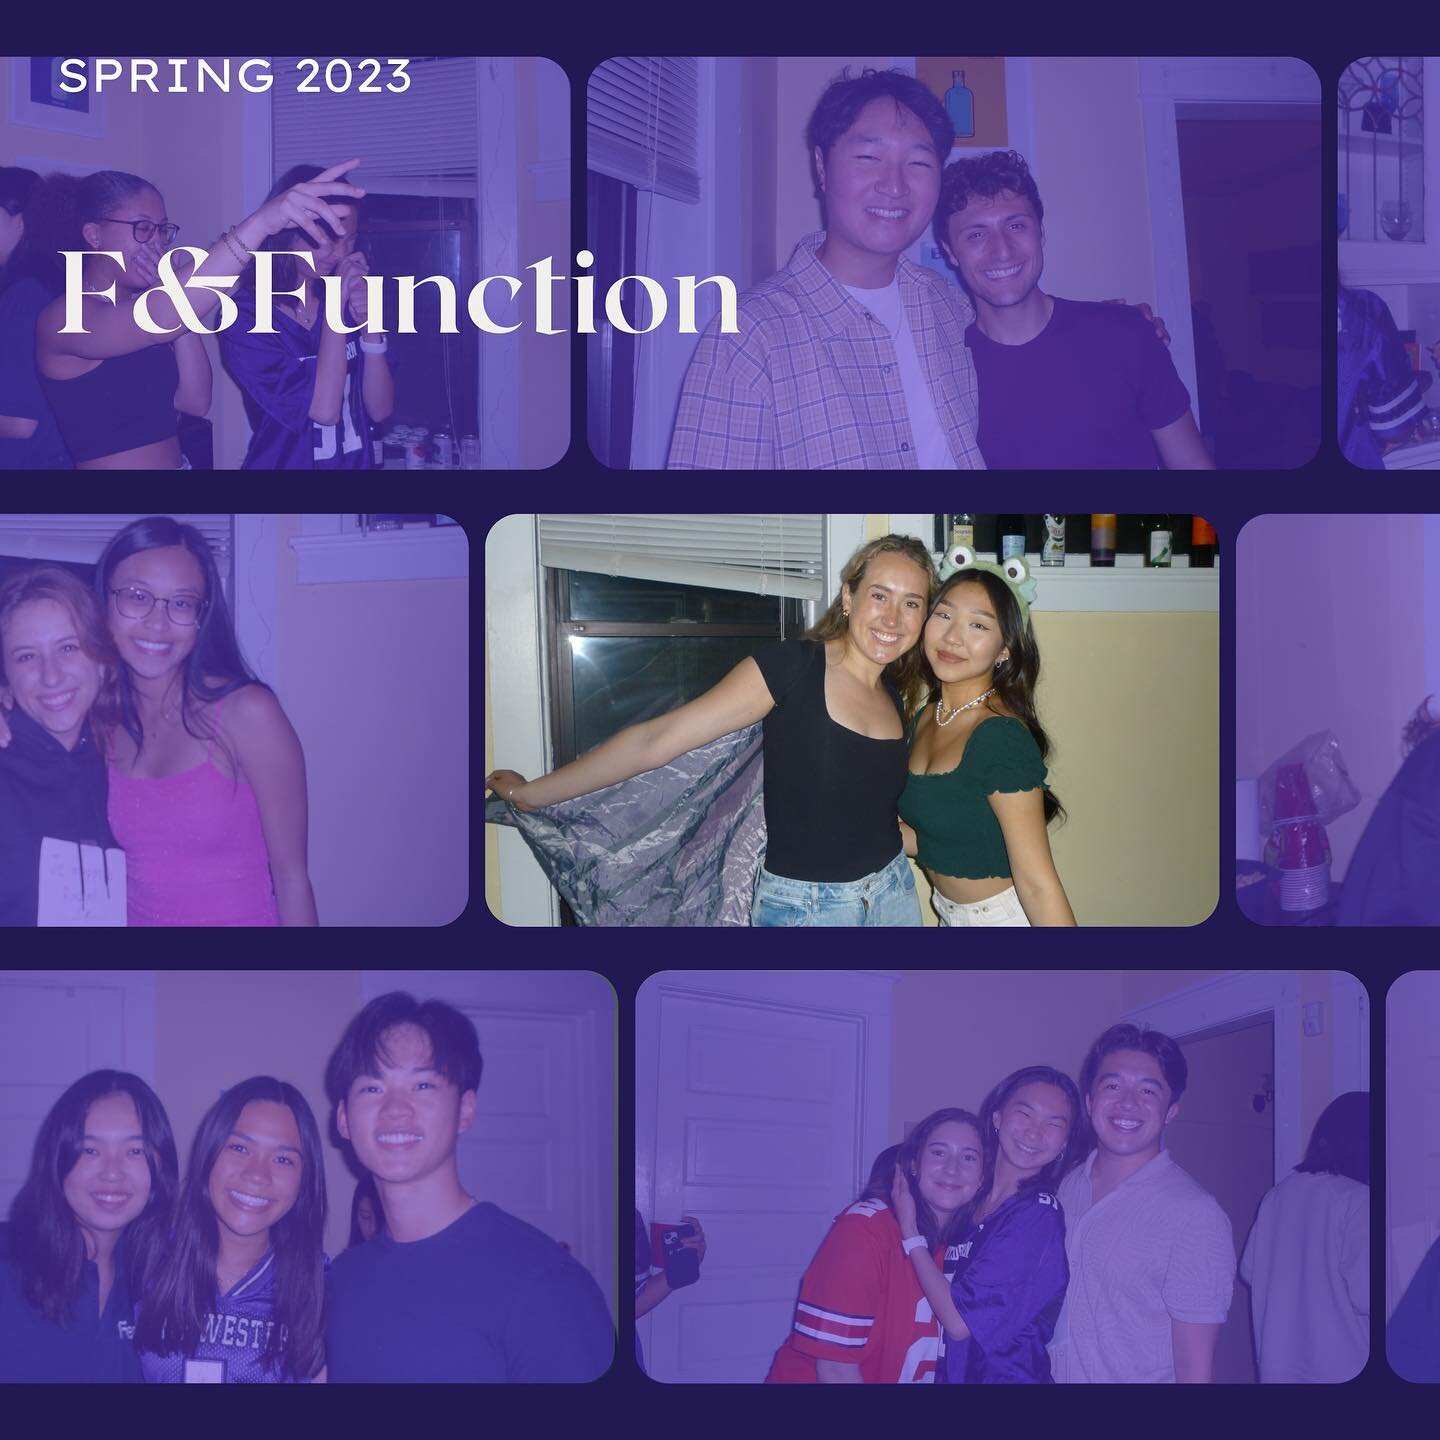 Last Friday, our members took a quick break from client work for our first club-wide bonding of the quarter: F&amp;Function! 

Swipe to see some highlights and guess what people dressed as (hint: the theme was to dress as anything starting with the l